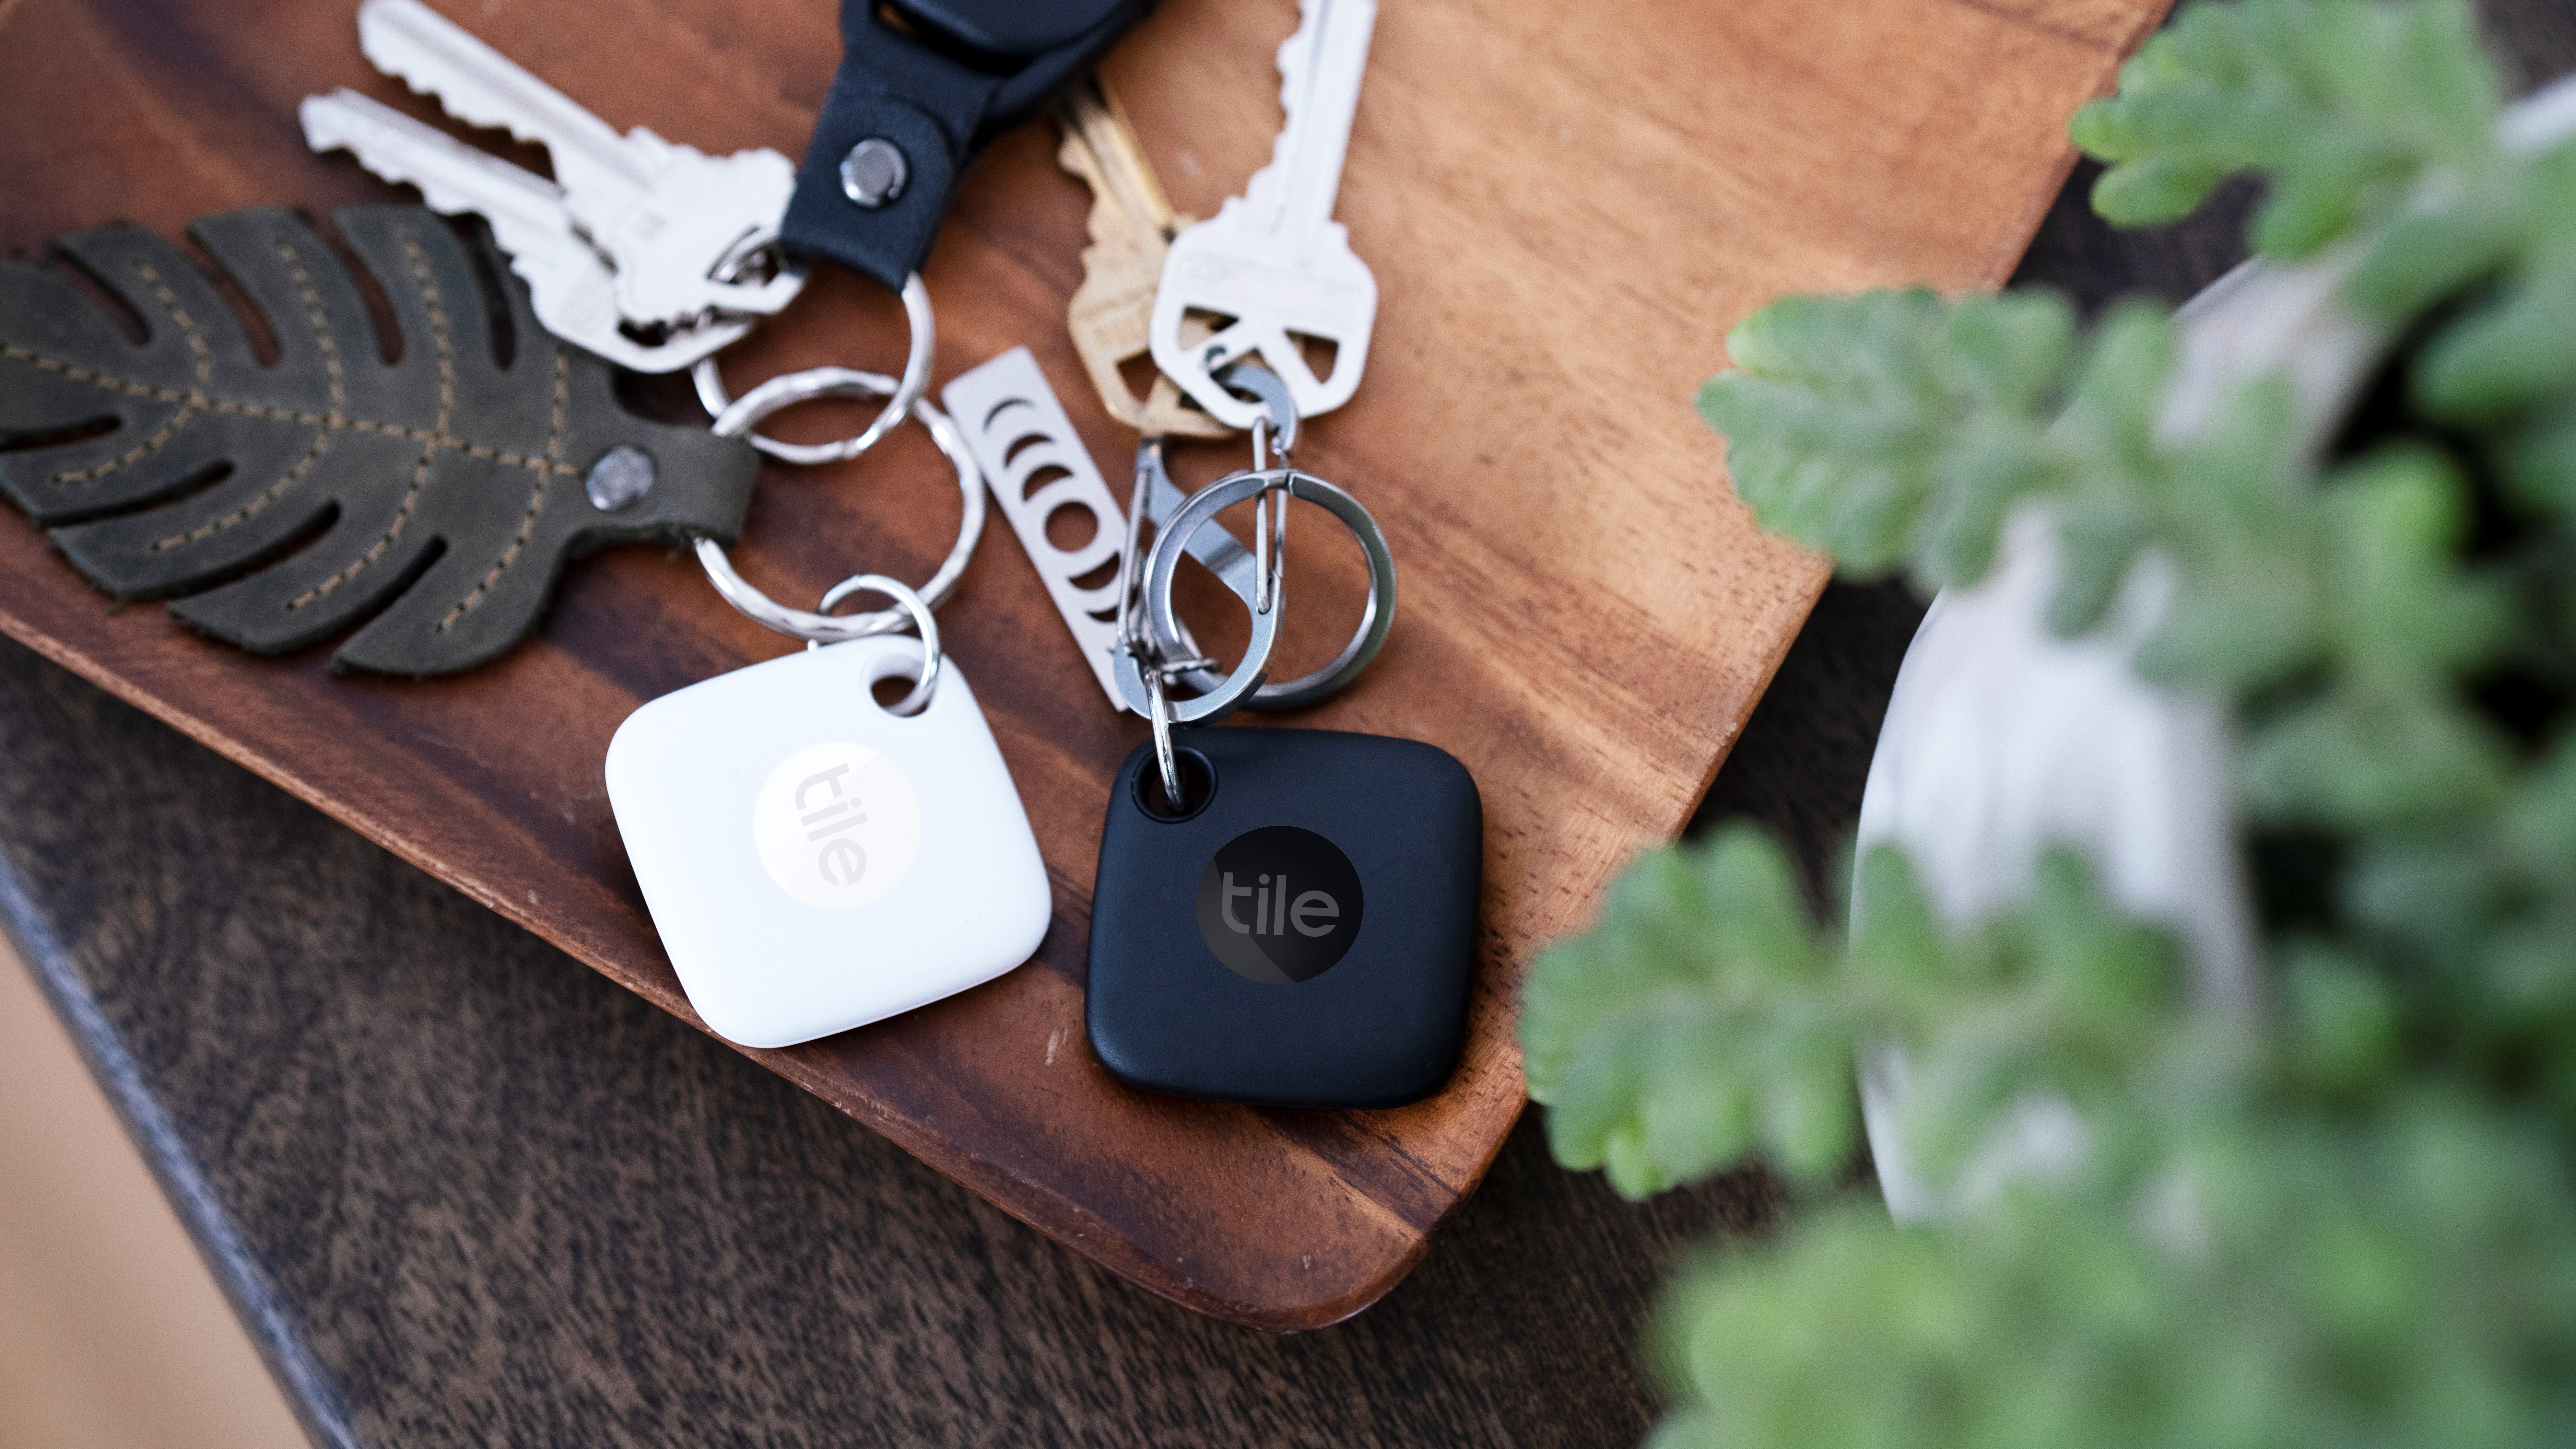 Tile's new lost item trackers have double the range, better looks